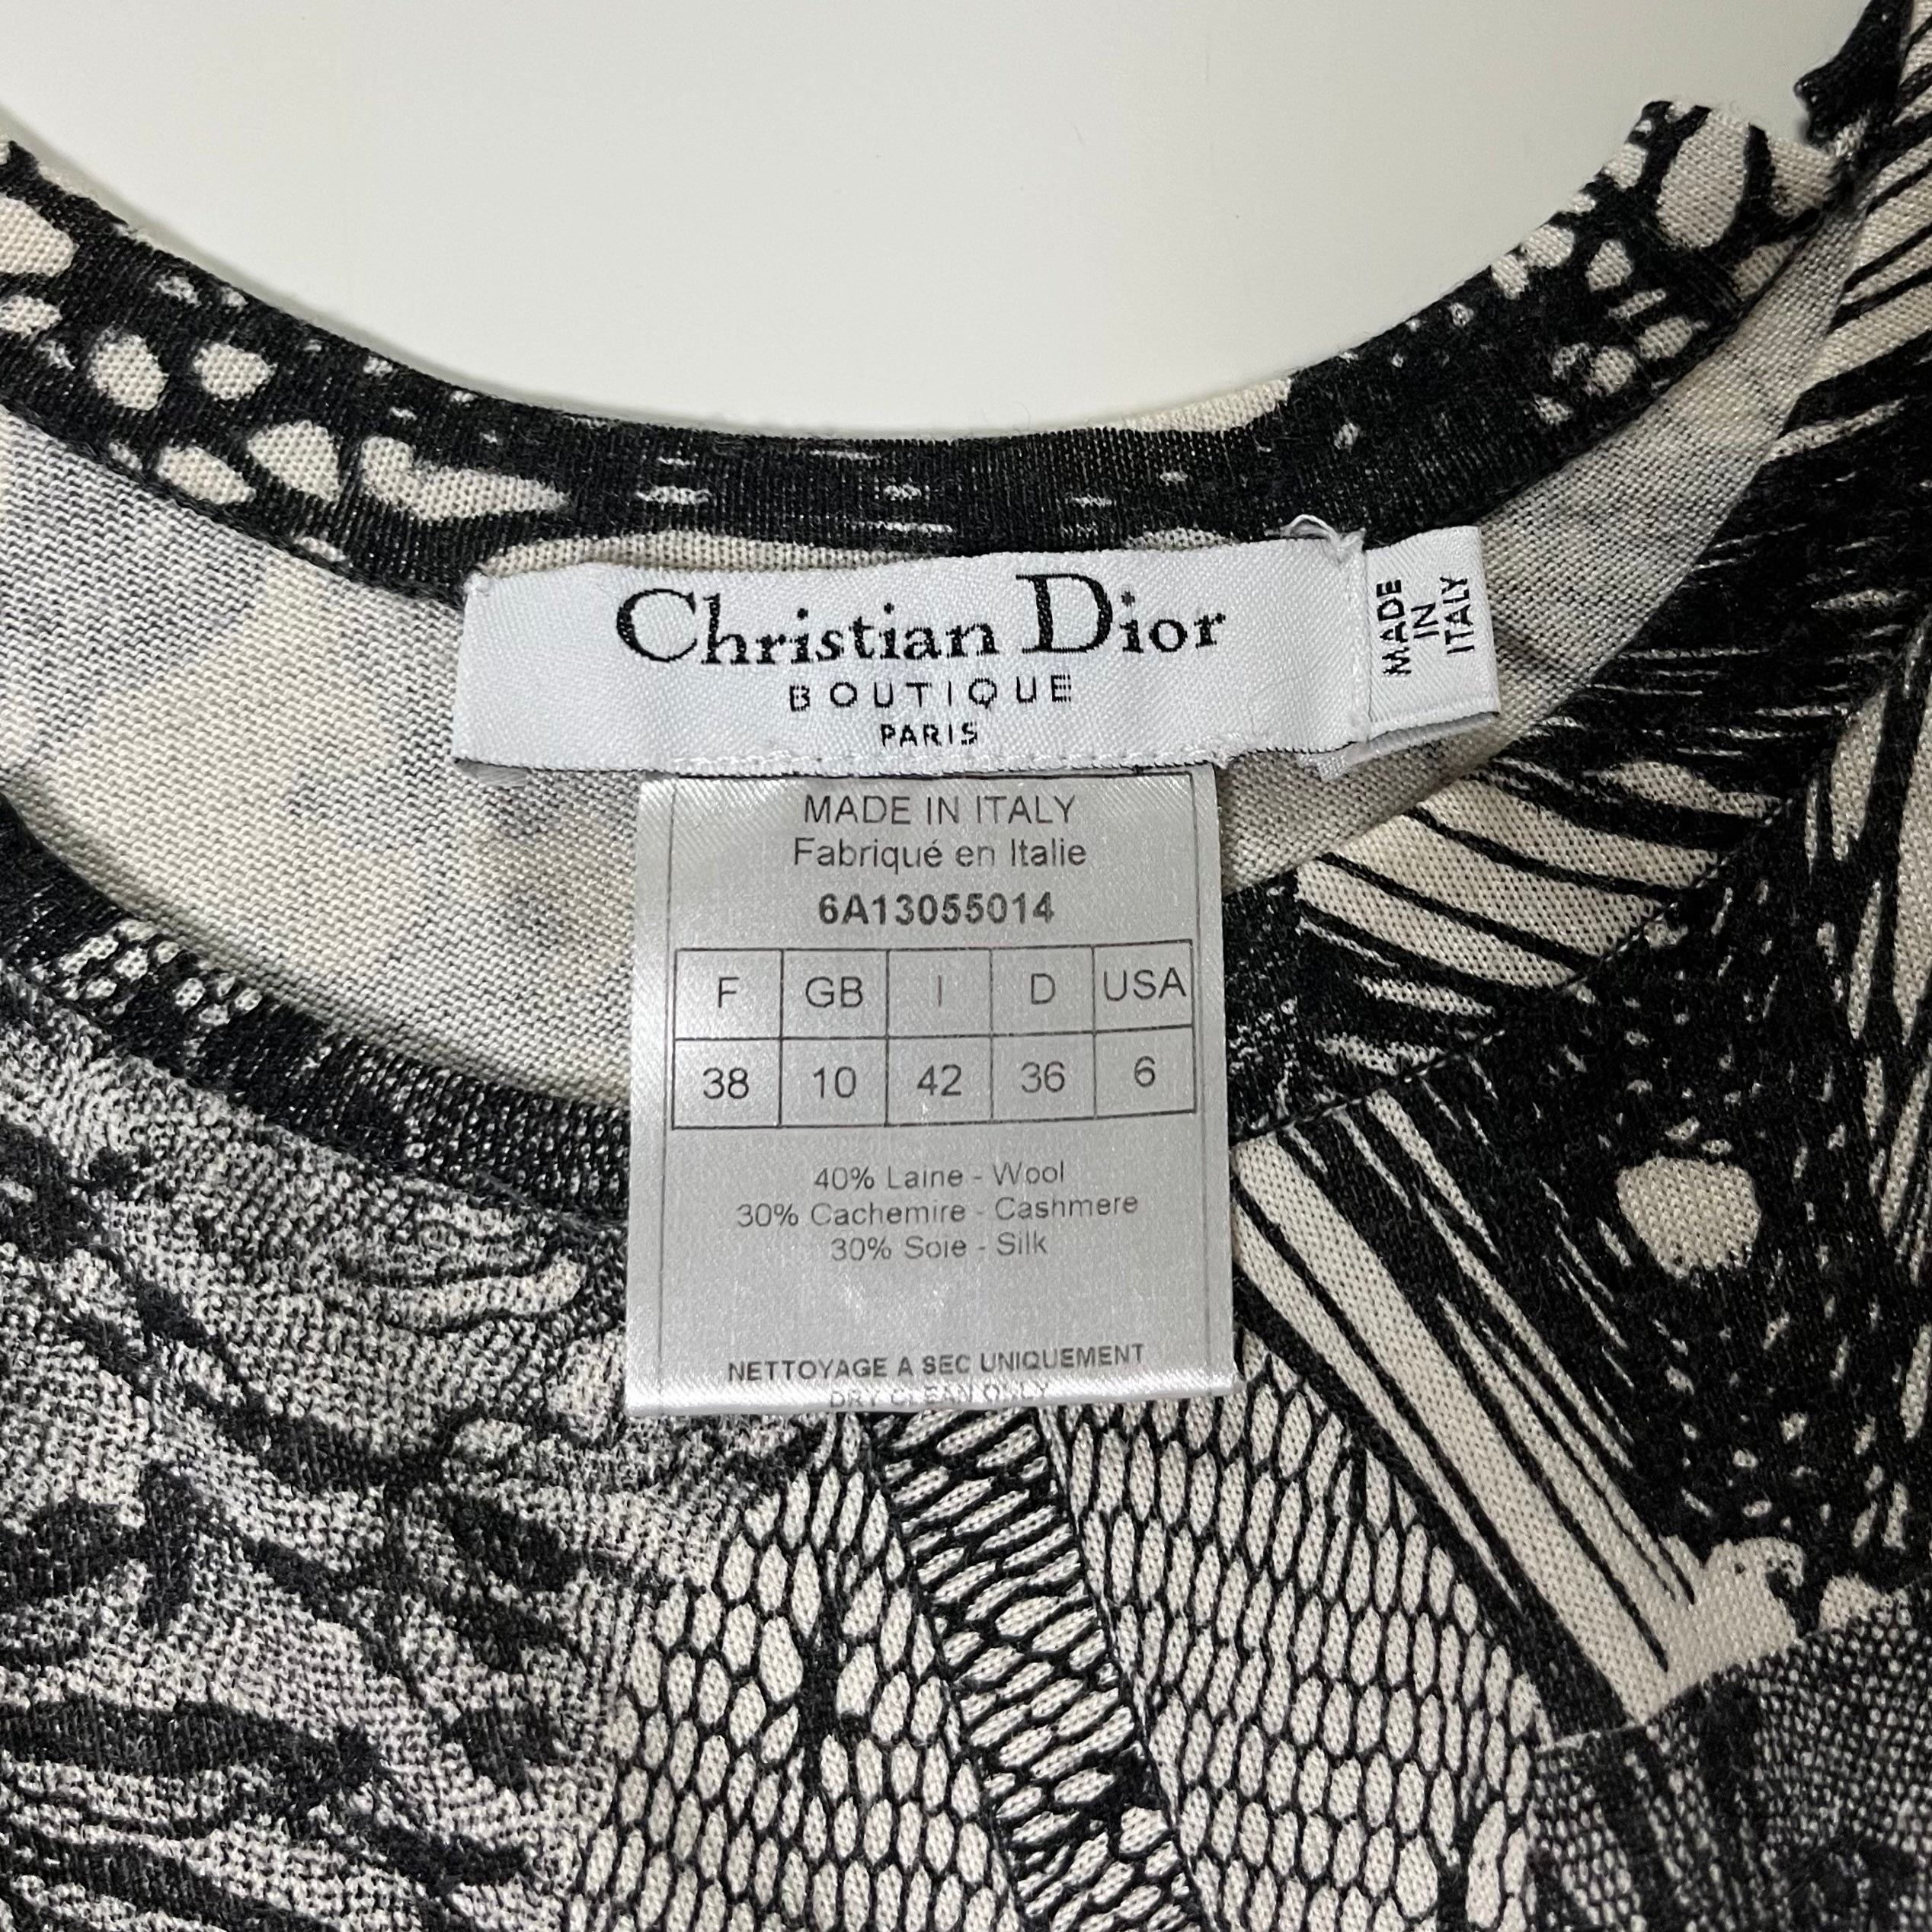 CHRISTIAN DIOR Spring Summer 2006 Lace Print Tank Top – 24/7 archives